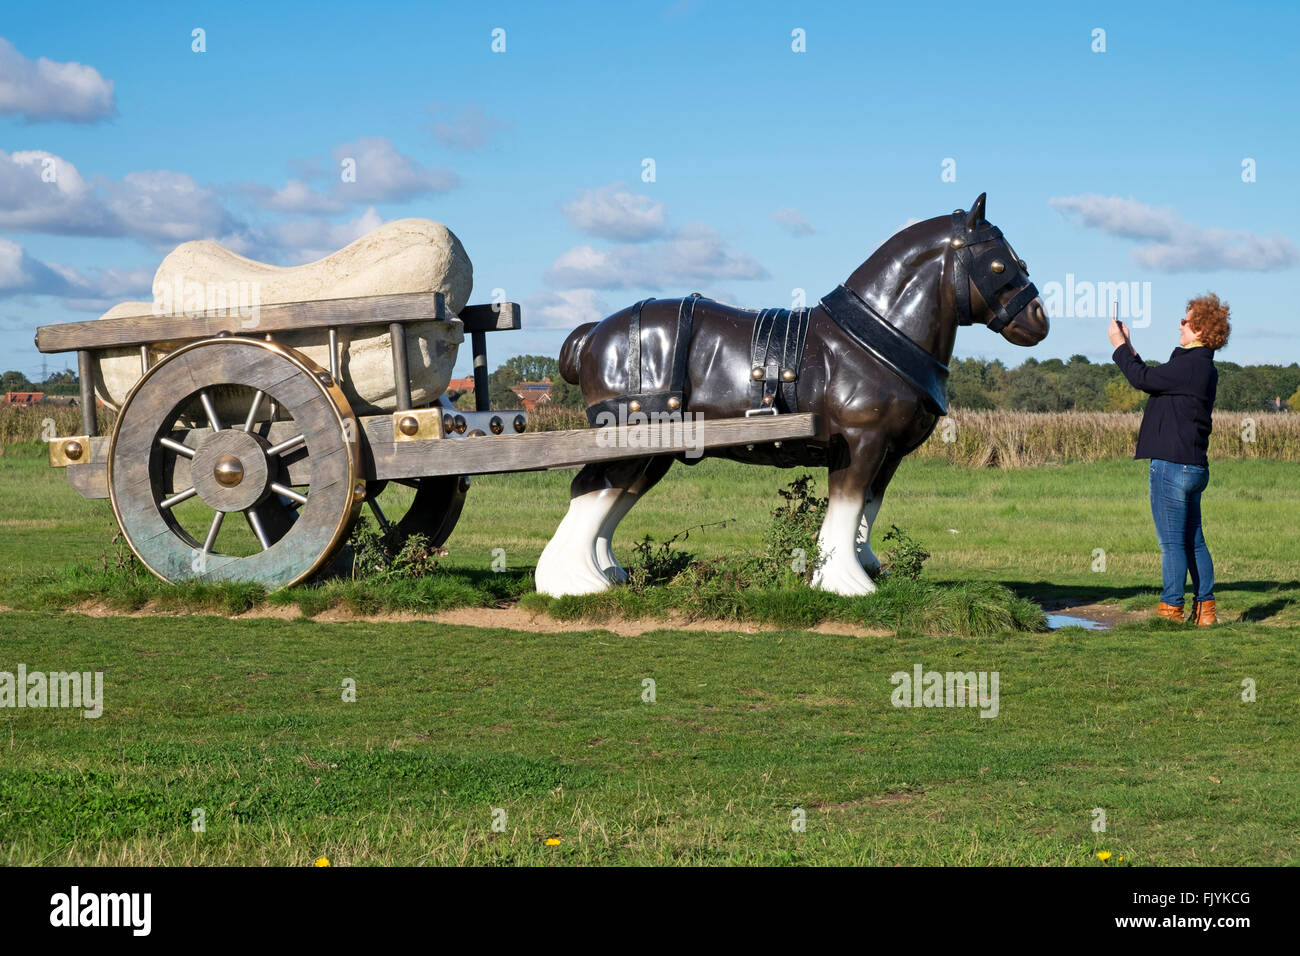 'Perceval' a sculpture by Sarah Lucas, Snape Maltlings, Suffolk, UK. Stock Photo